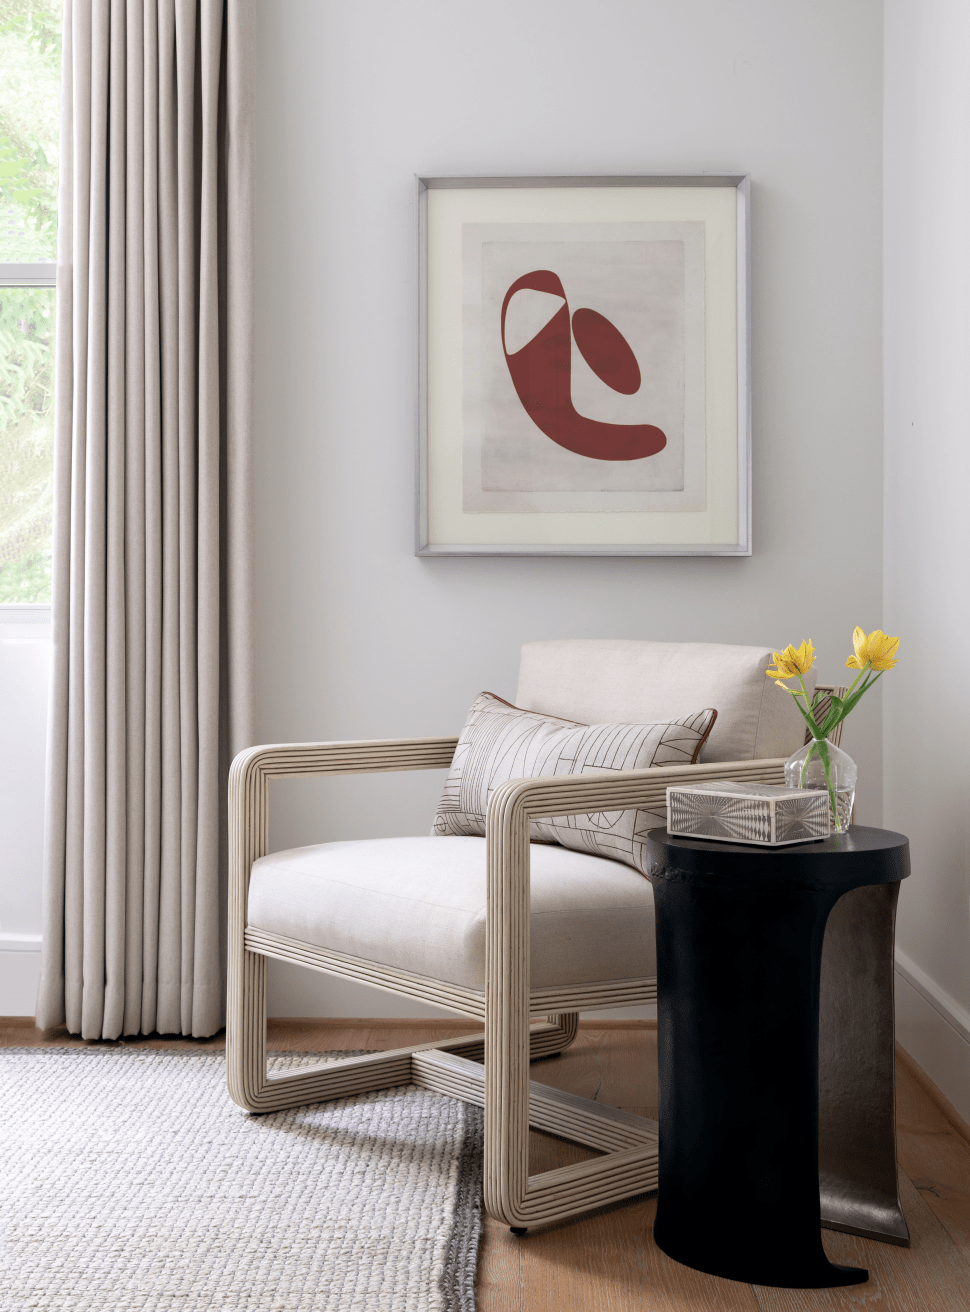 The sitting nook in the guest room at Dunstan, designed by Laura U